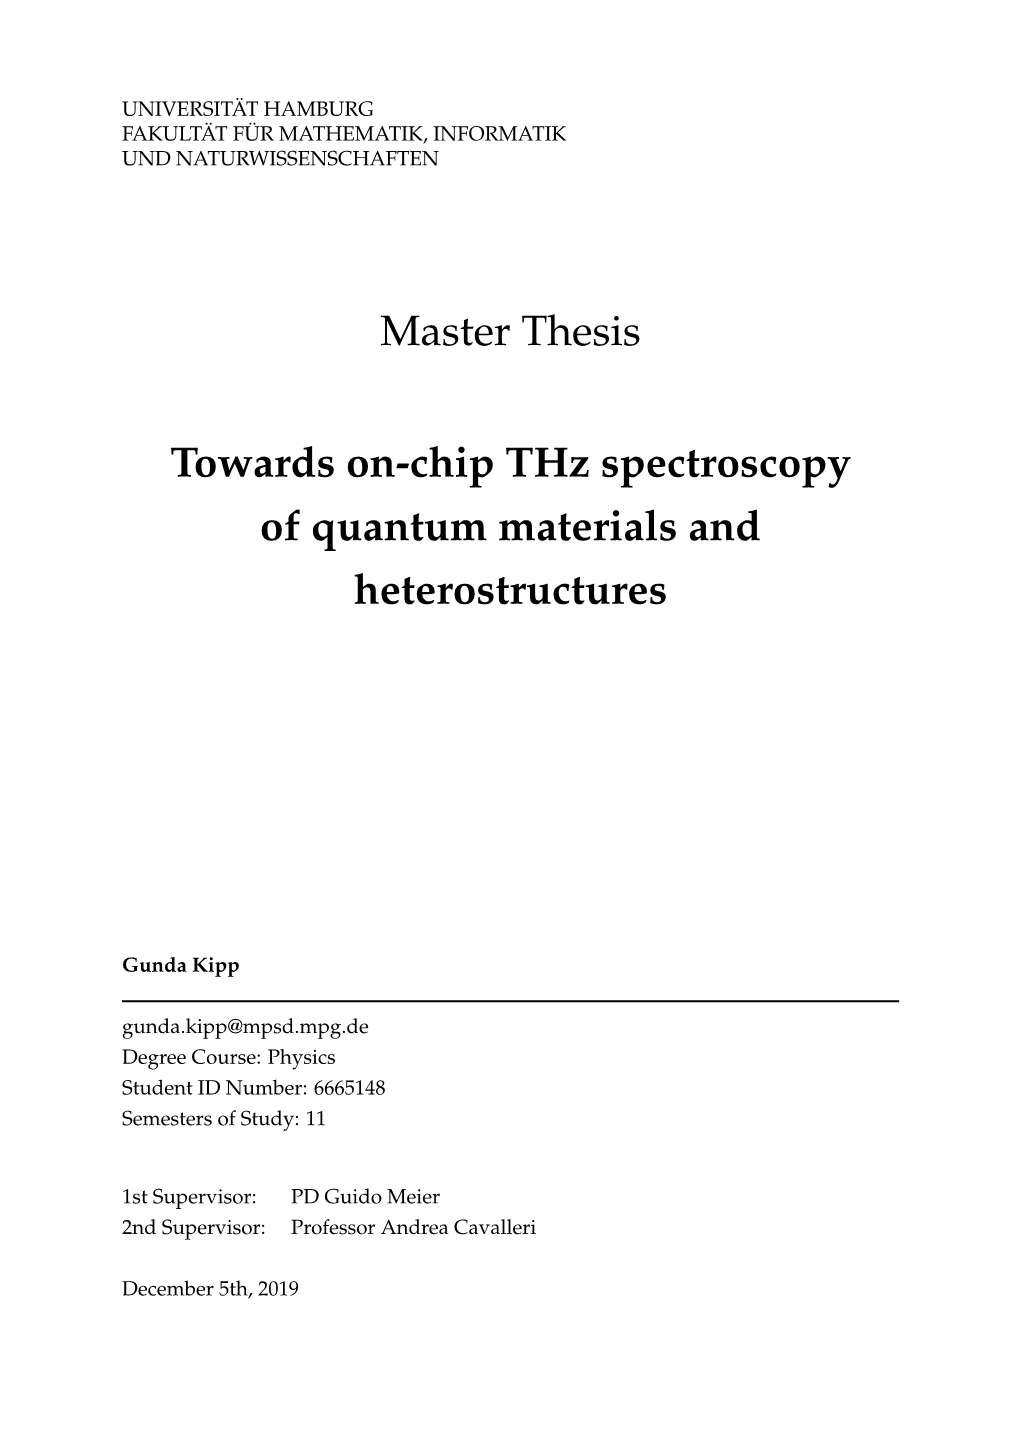 Master Thesis Towards On-Chip Thz Spectroscopy of Quantum Materials